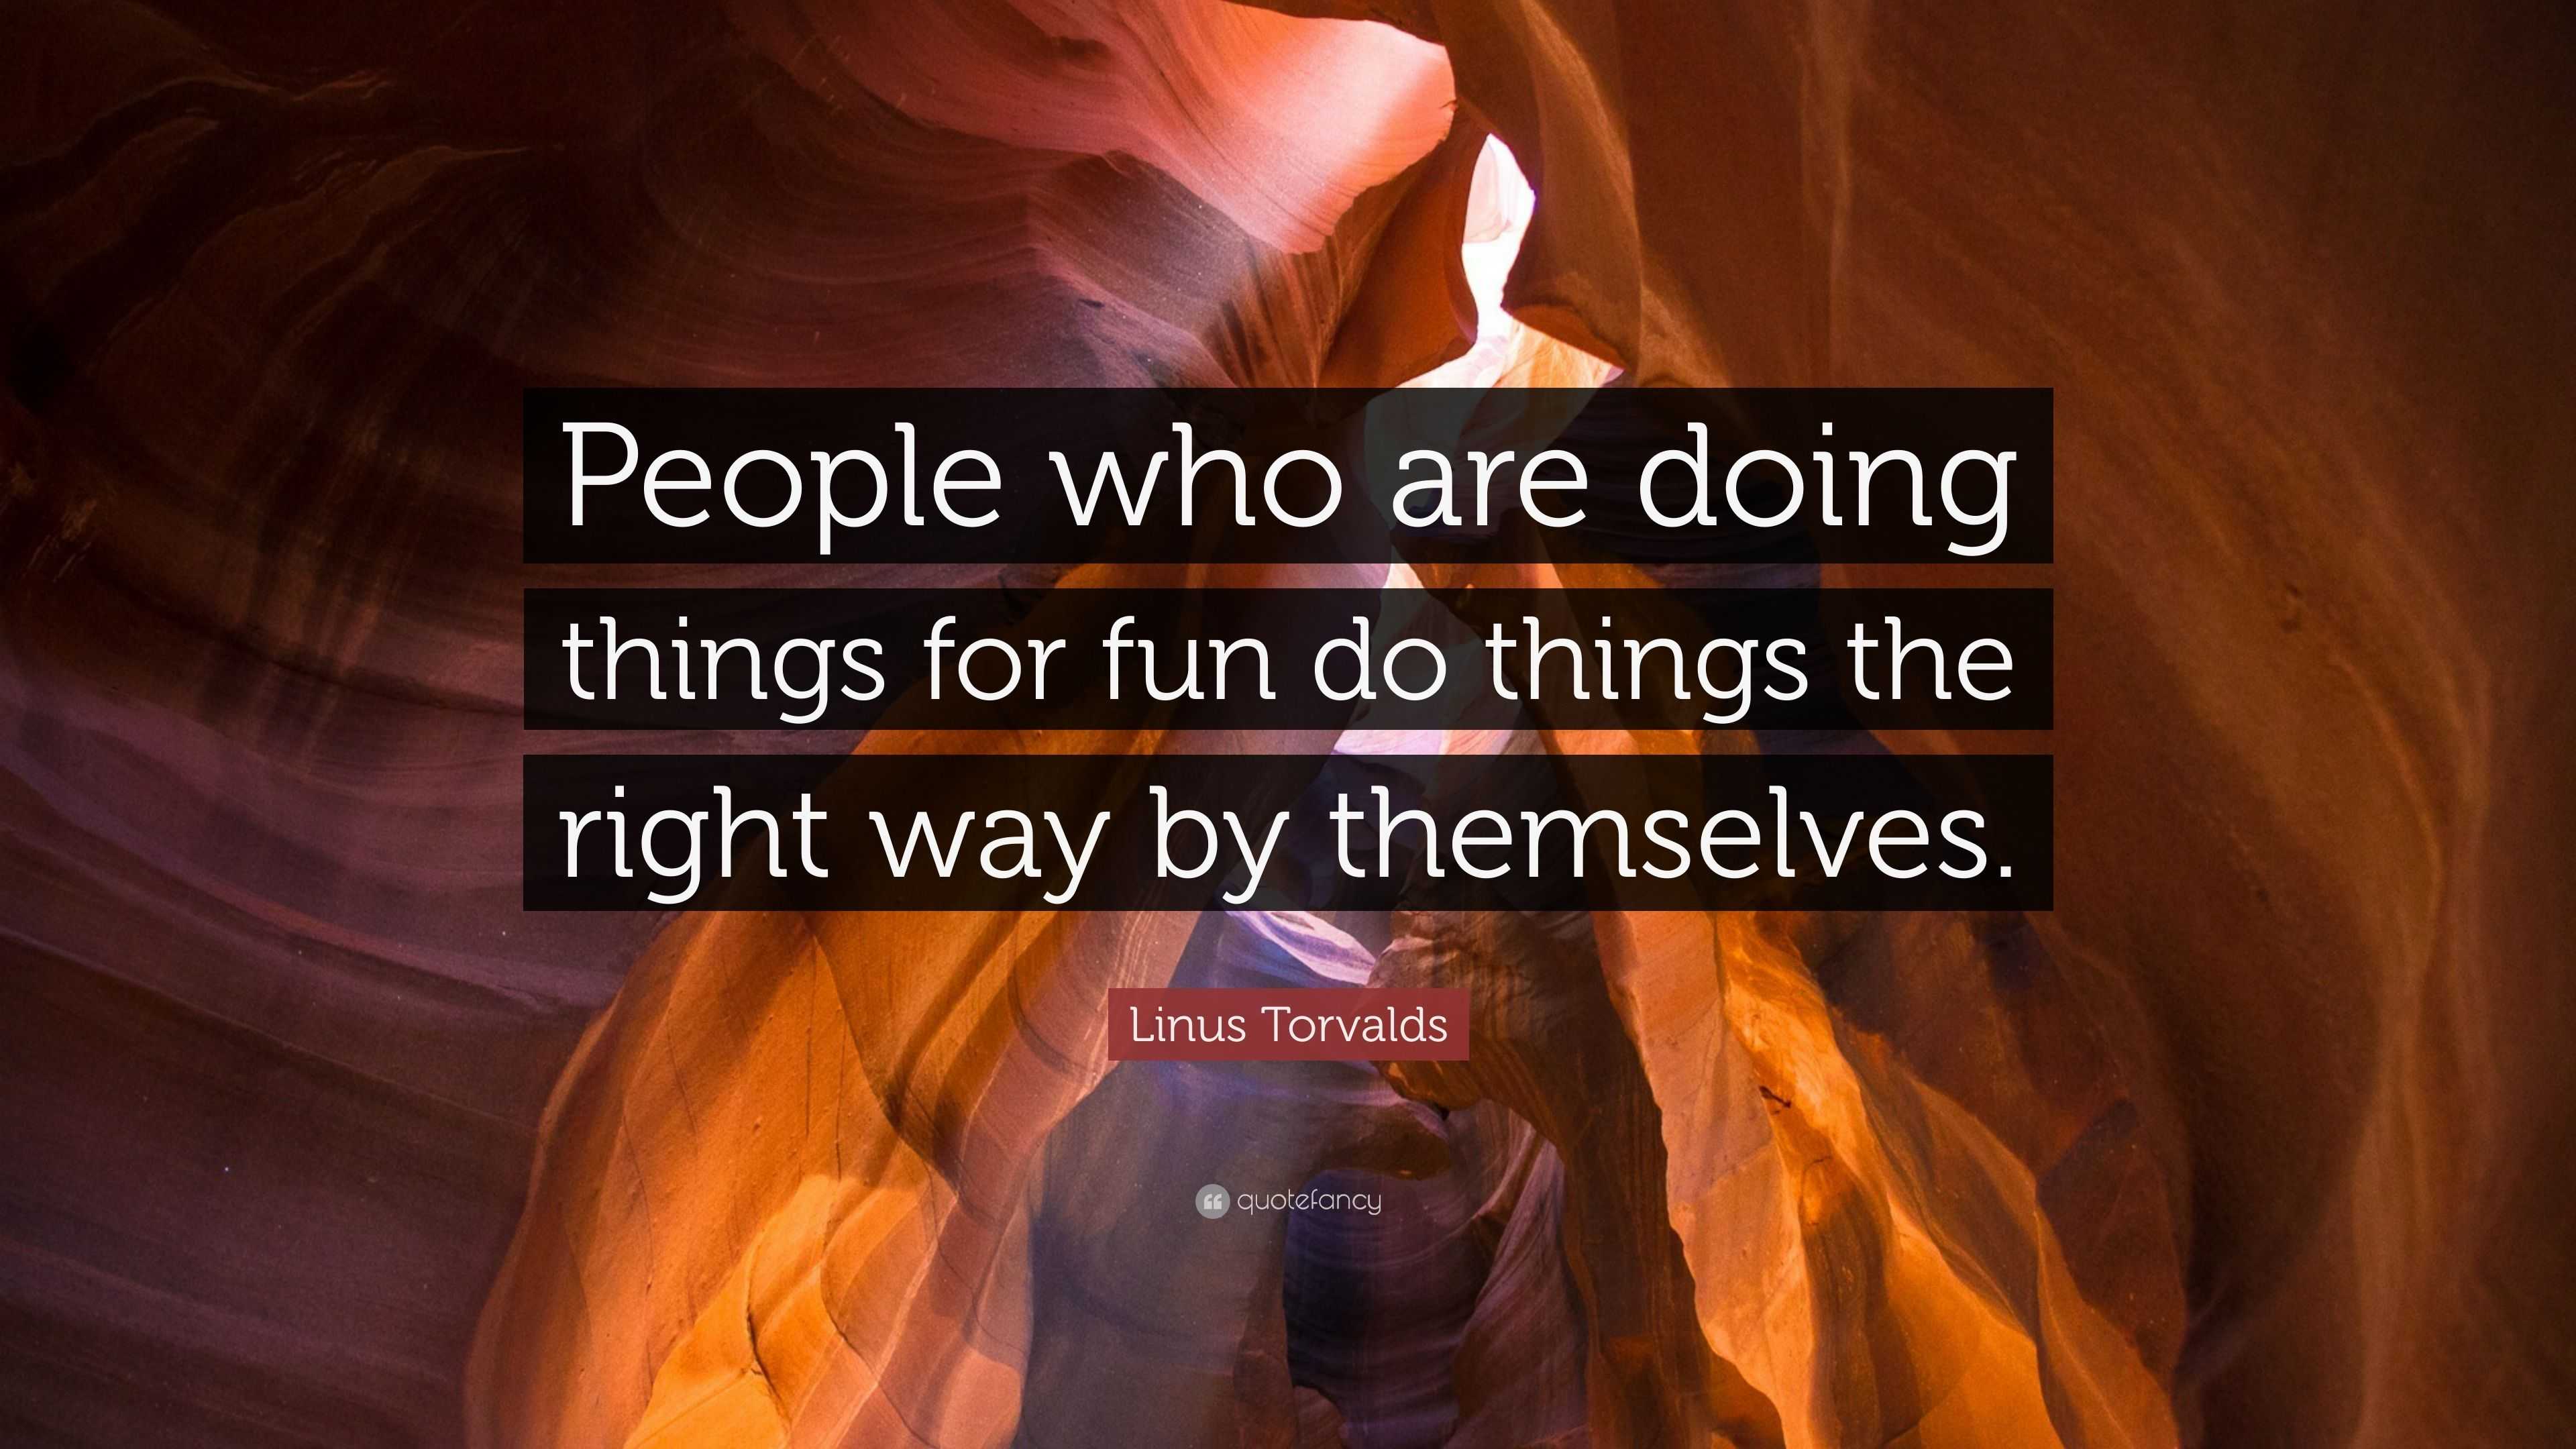 Linus Torvalds Quote “People who are doing things for fun